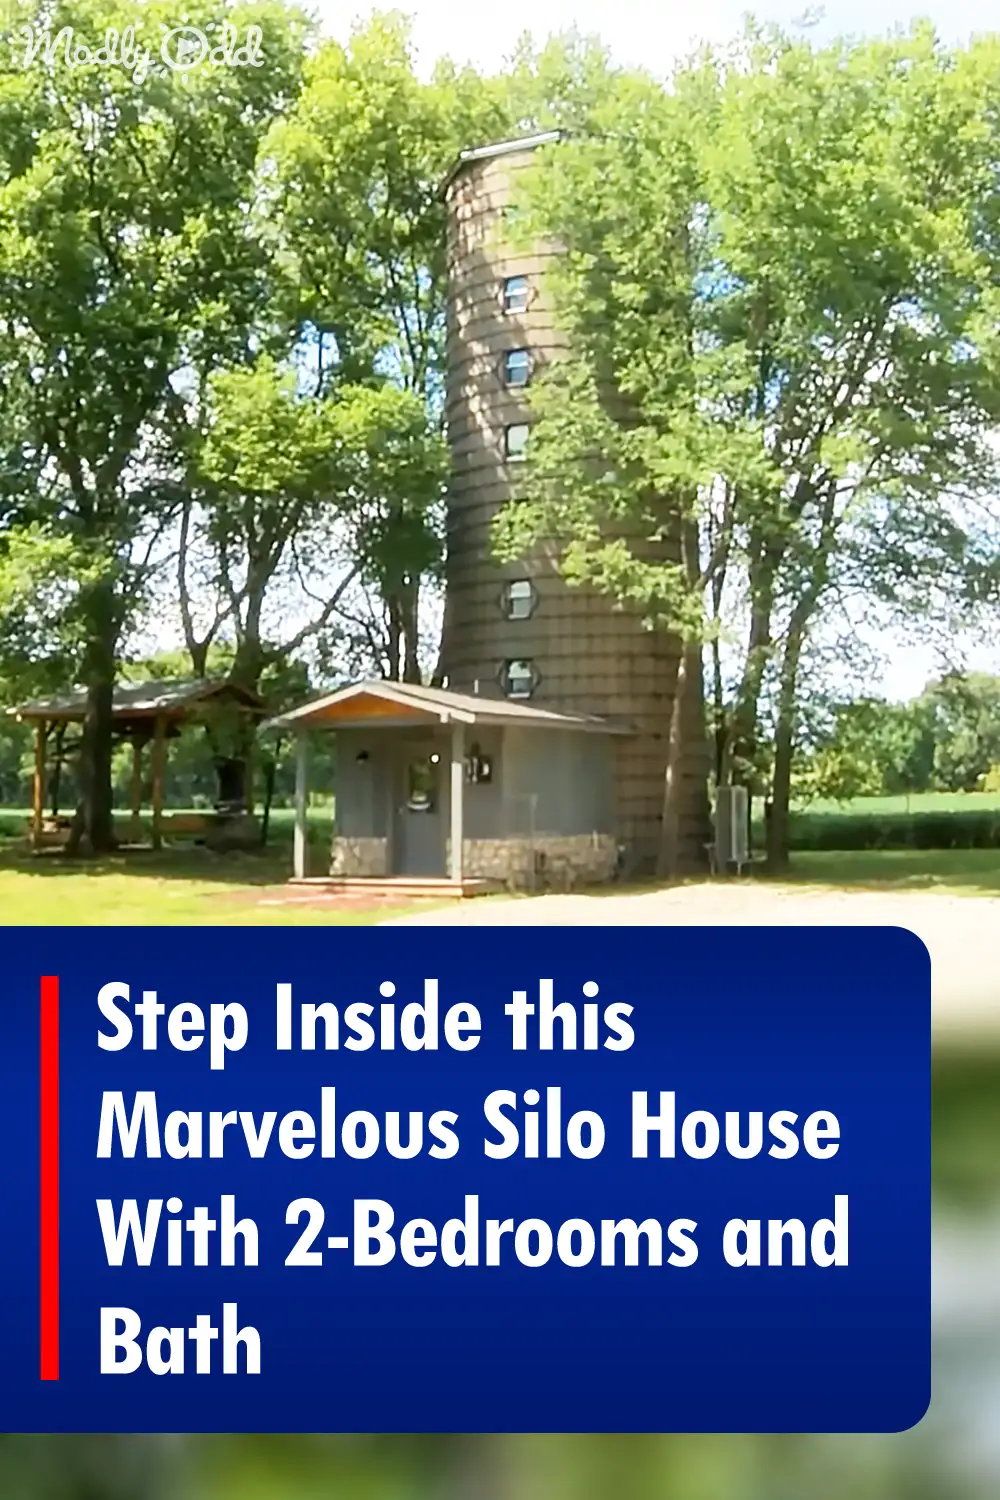 Step Inside this Marvelous Silo House With 2-Bedrooms and Bath